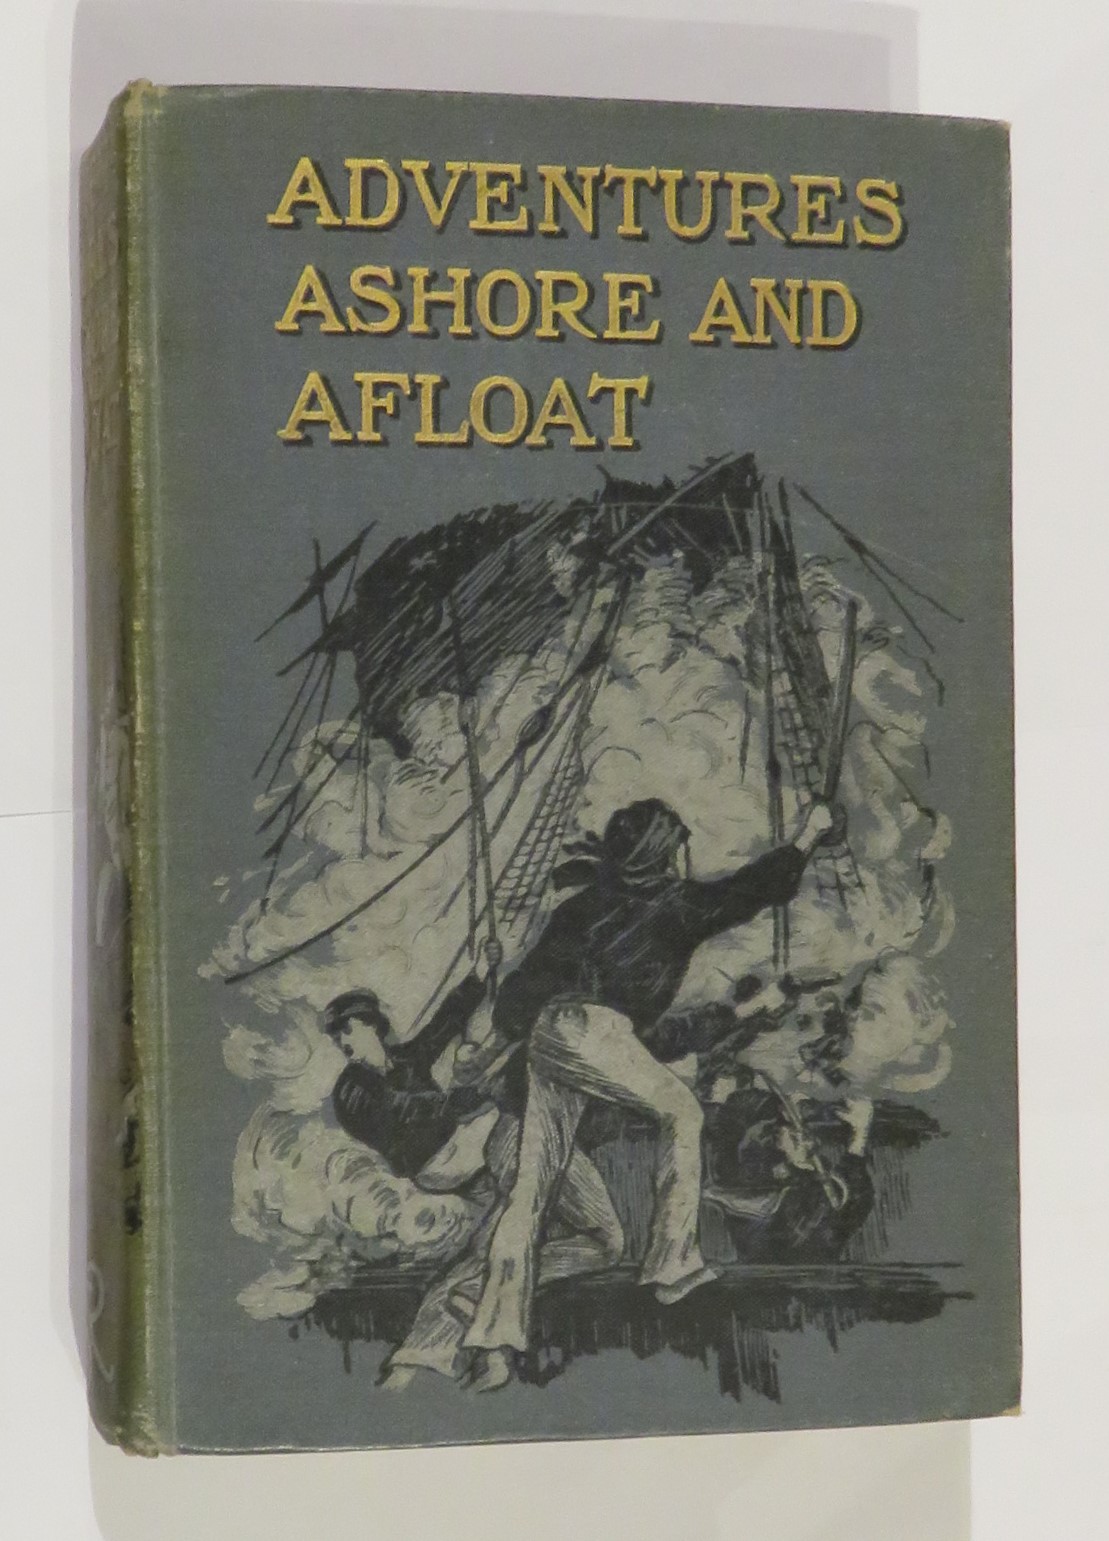 Adventures Ashore and Afloat